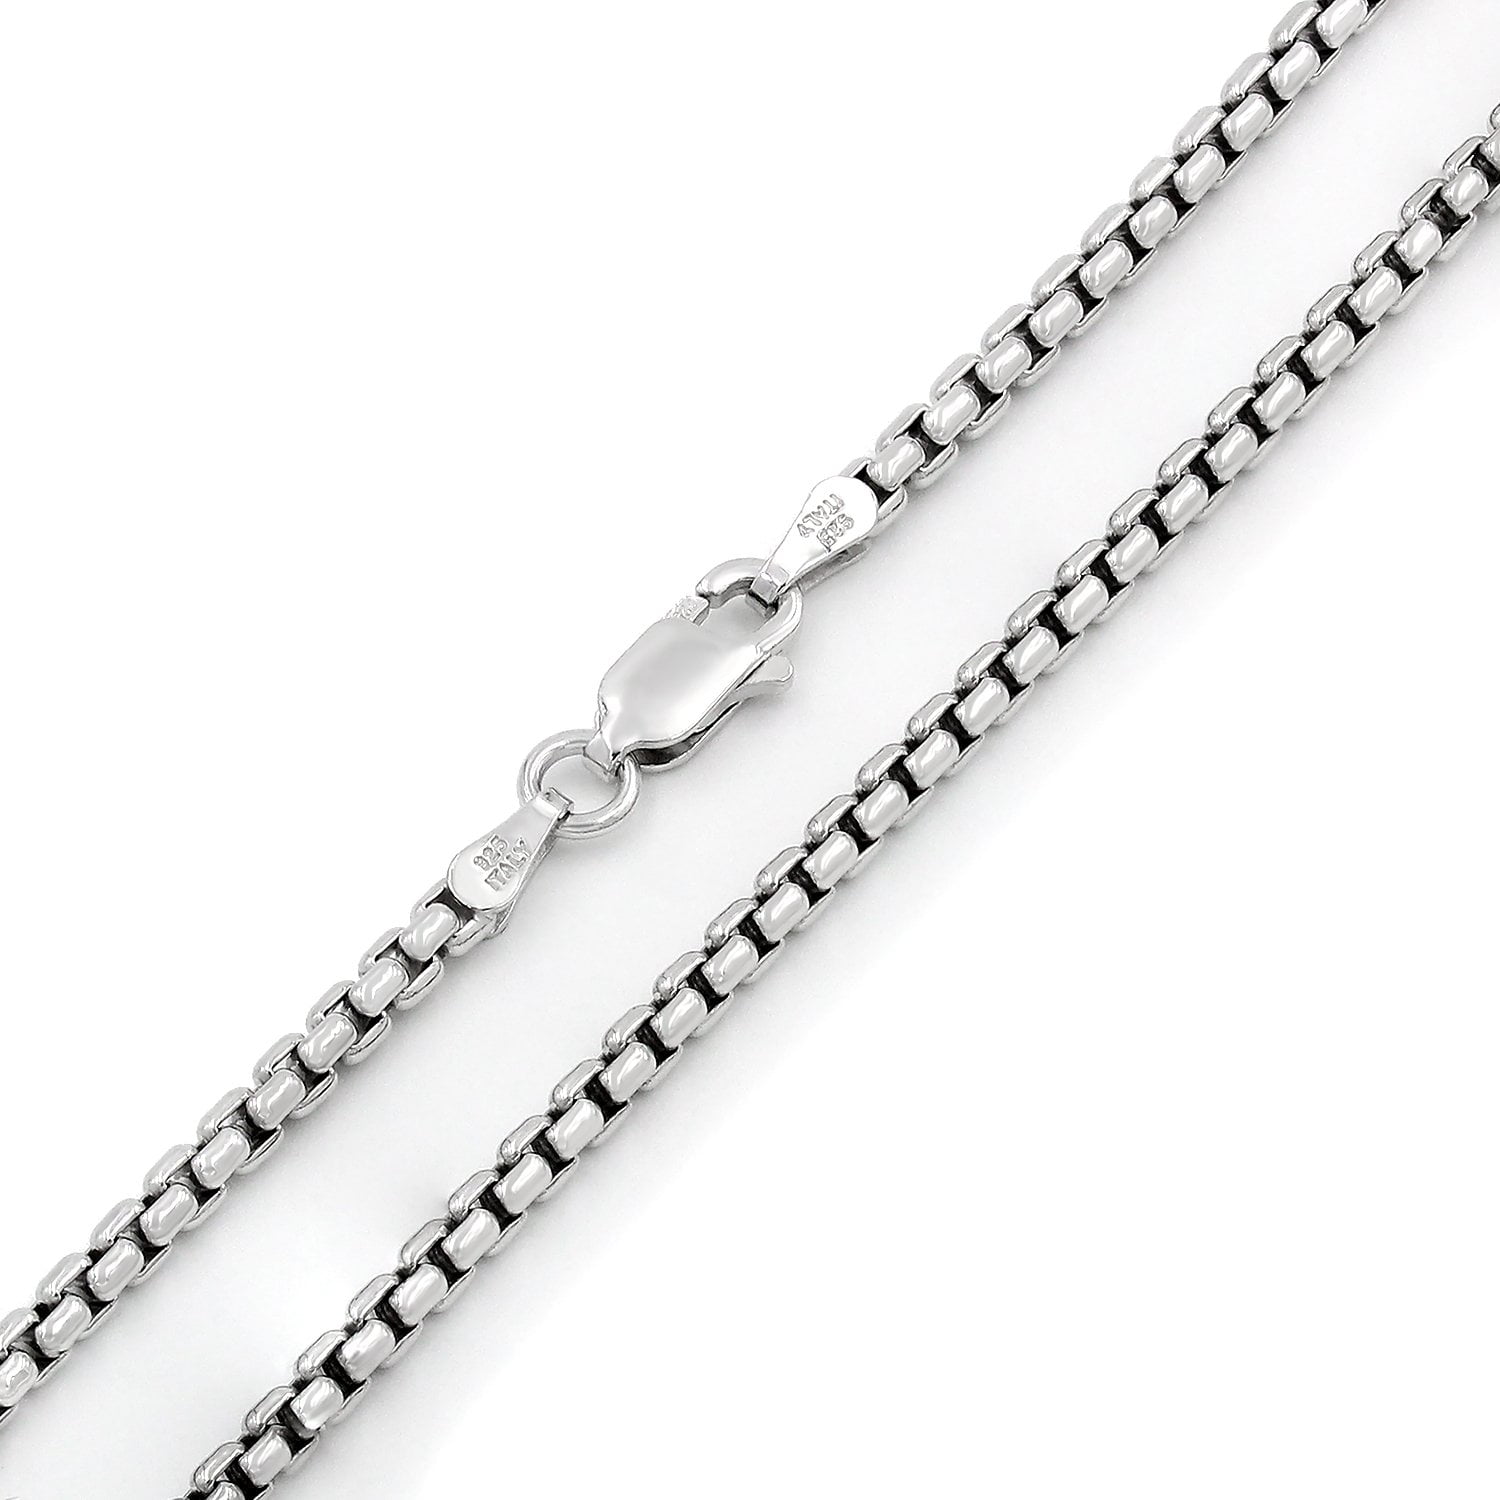 925 Sterling Silver Rhodium-plated Box Chain Necklace in Silver Choice of Lengths 16 20 22 24 30 18 and Variety of mm Options 